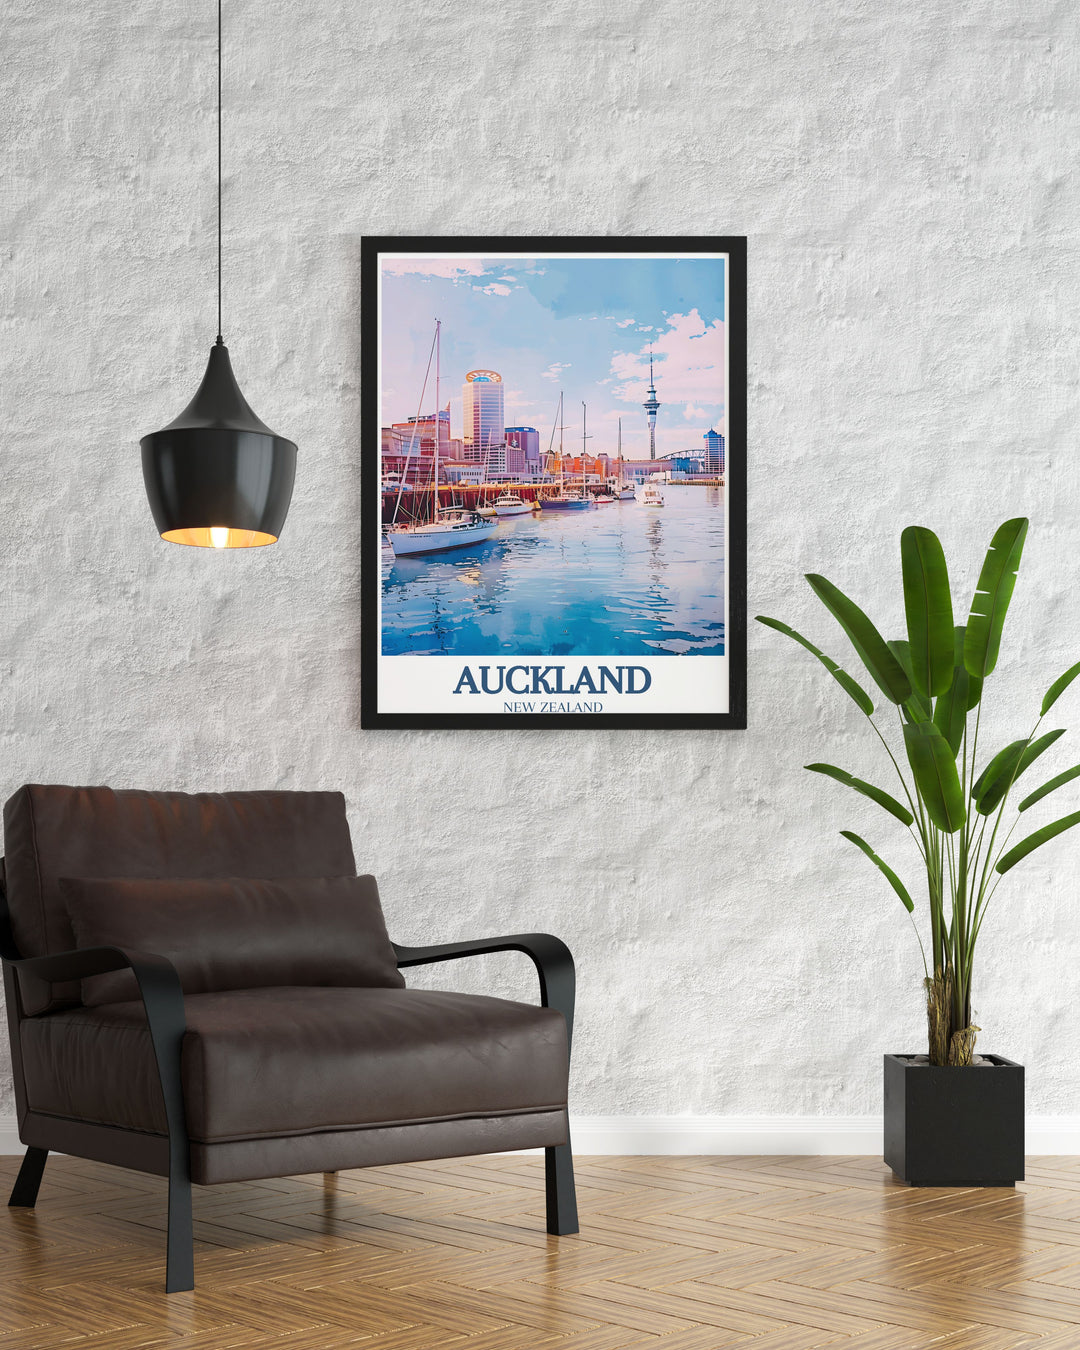 Elegant New Zealand wall art depicting the vibrant Viaduct Harbour and dynamic Wynyard Quarter. This piece highlights the contrast between modern urban design and natural beauty, adding a contemporary yet tranquil touch to any room.